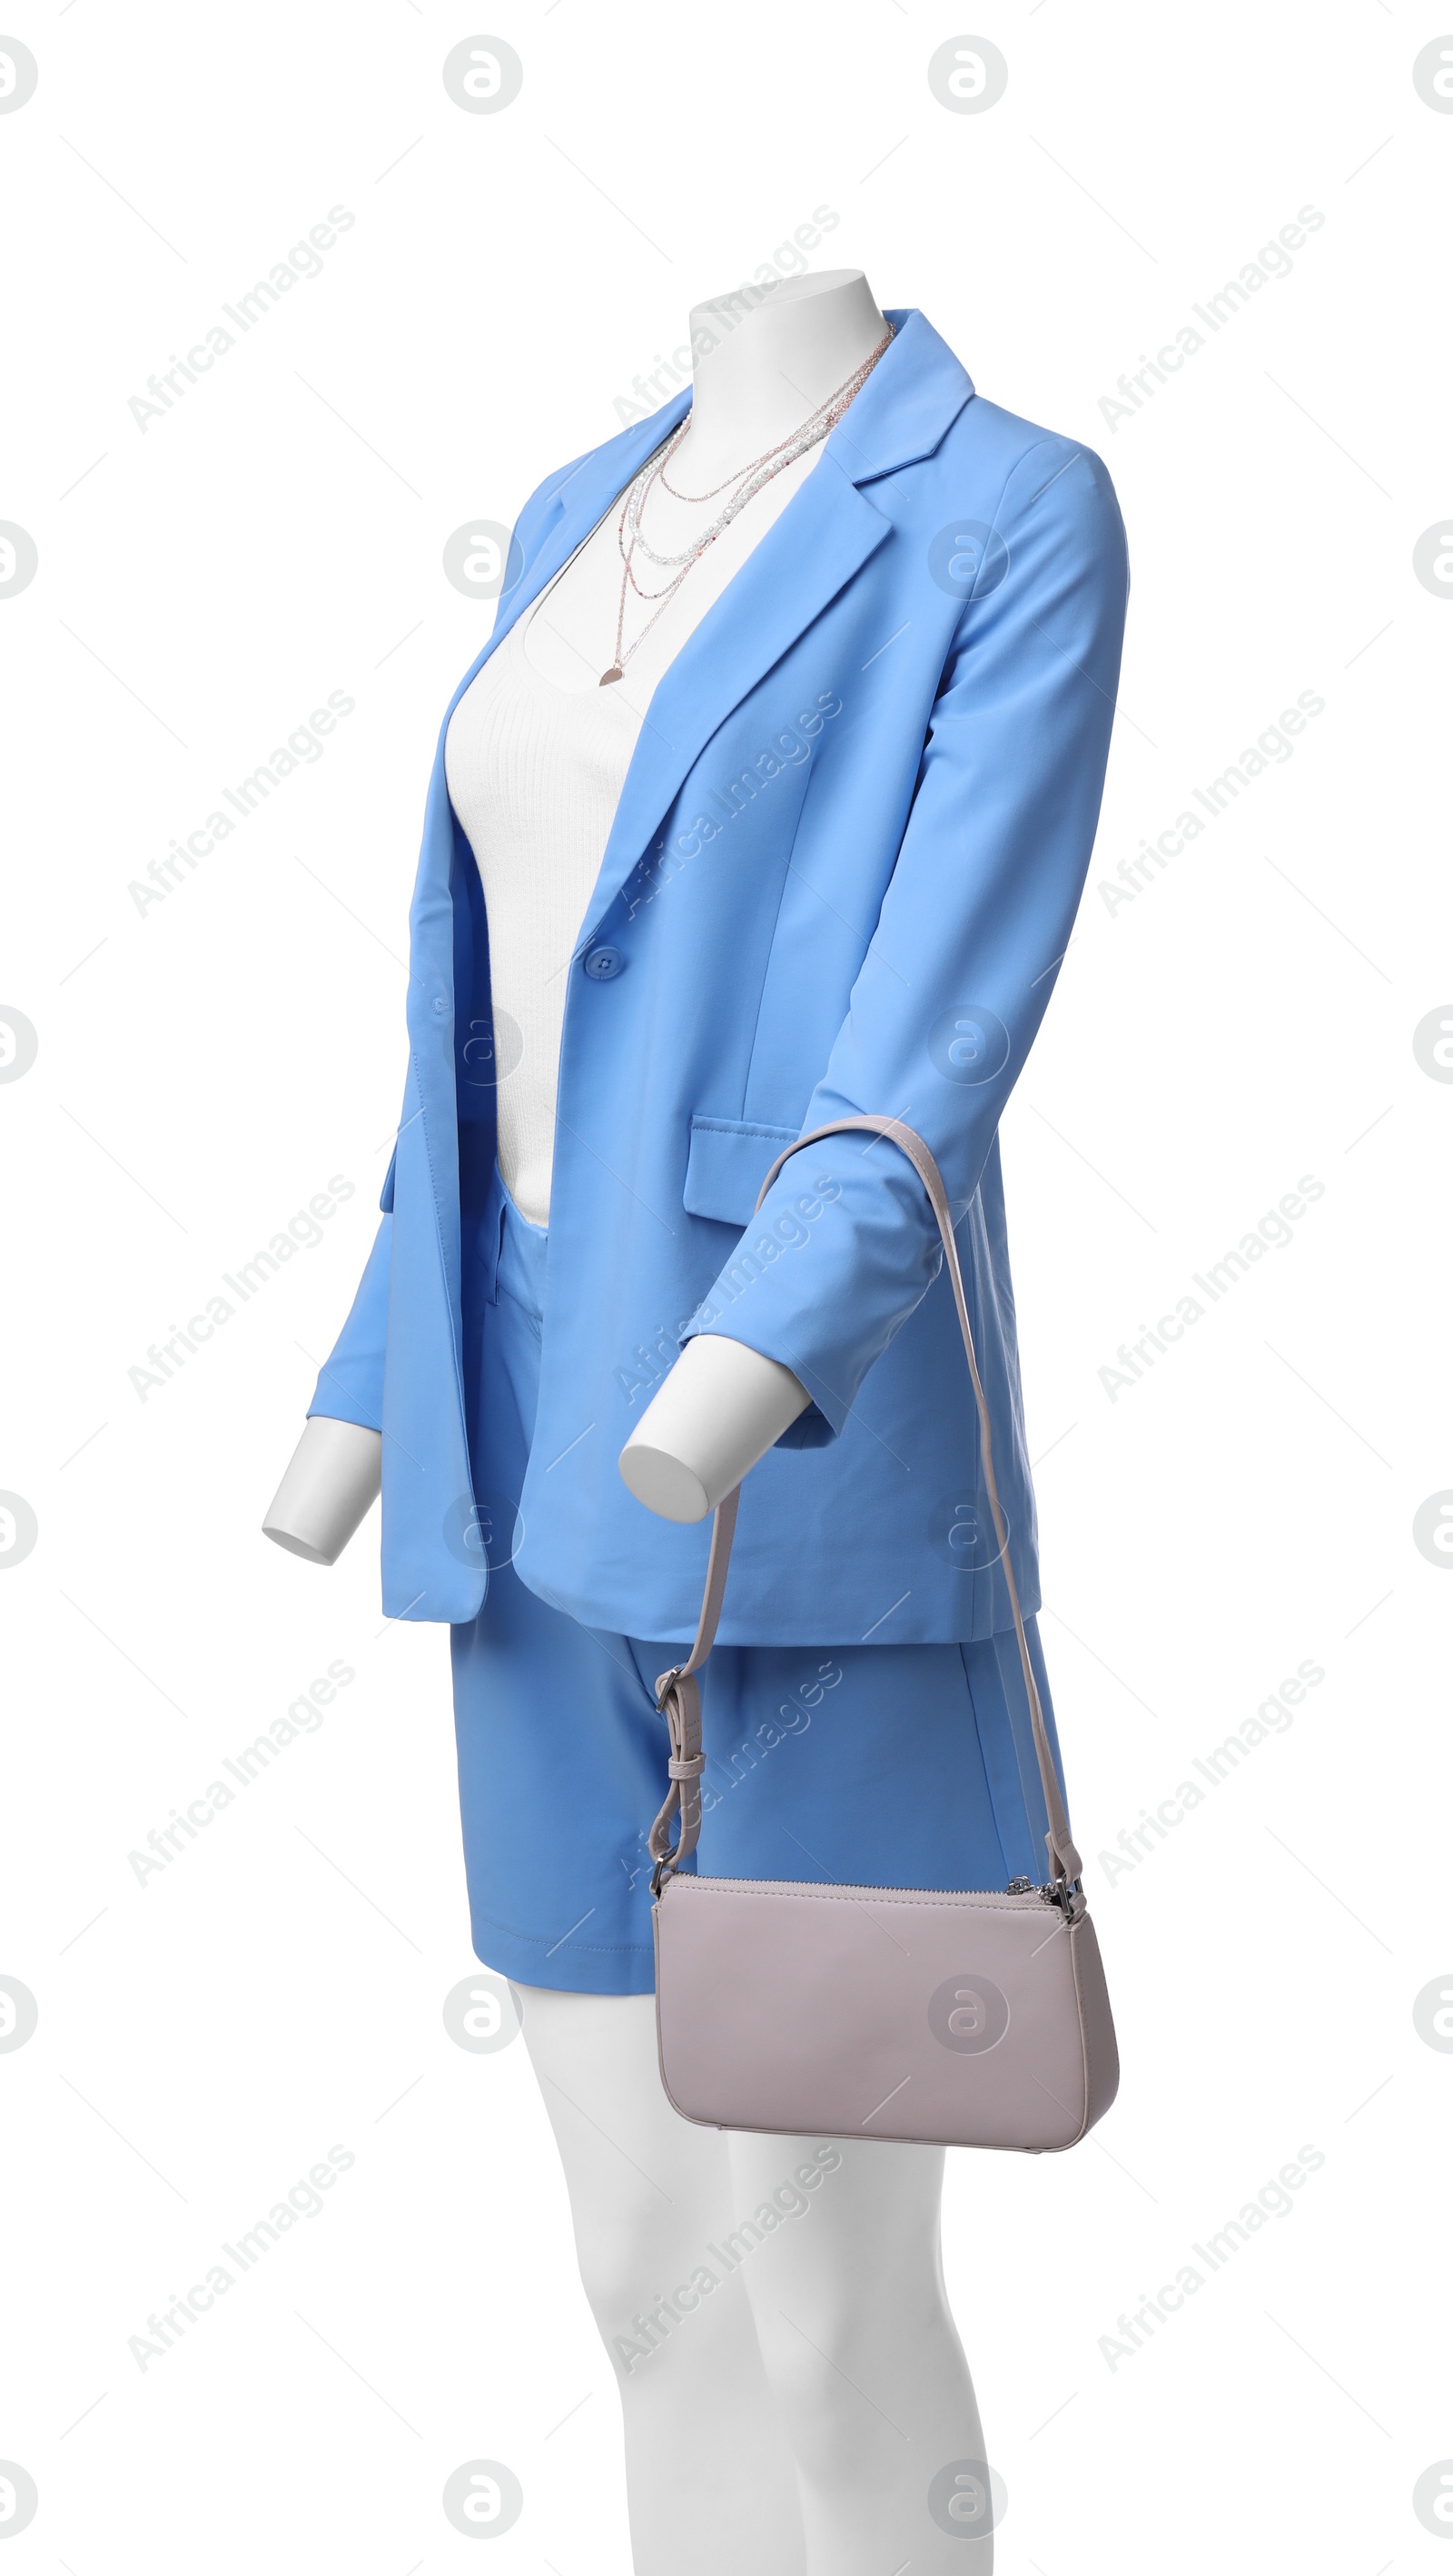 Photo of Female mannequin dressed in light blue suit and top with accessories isolated on white. Stylish outfit